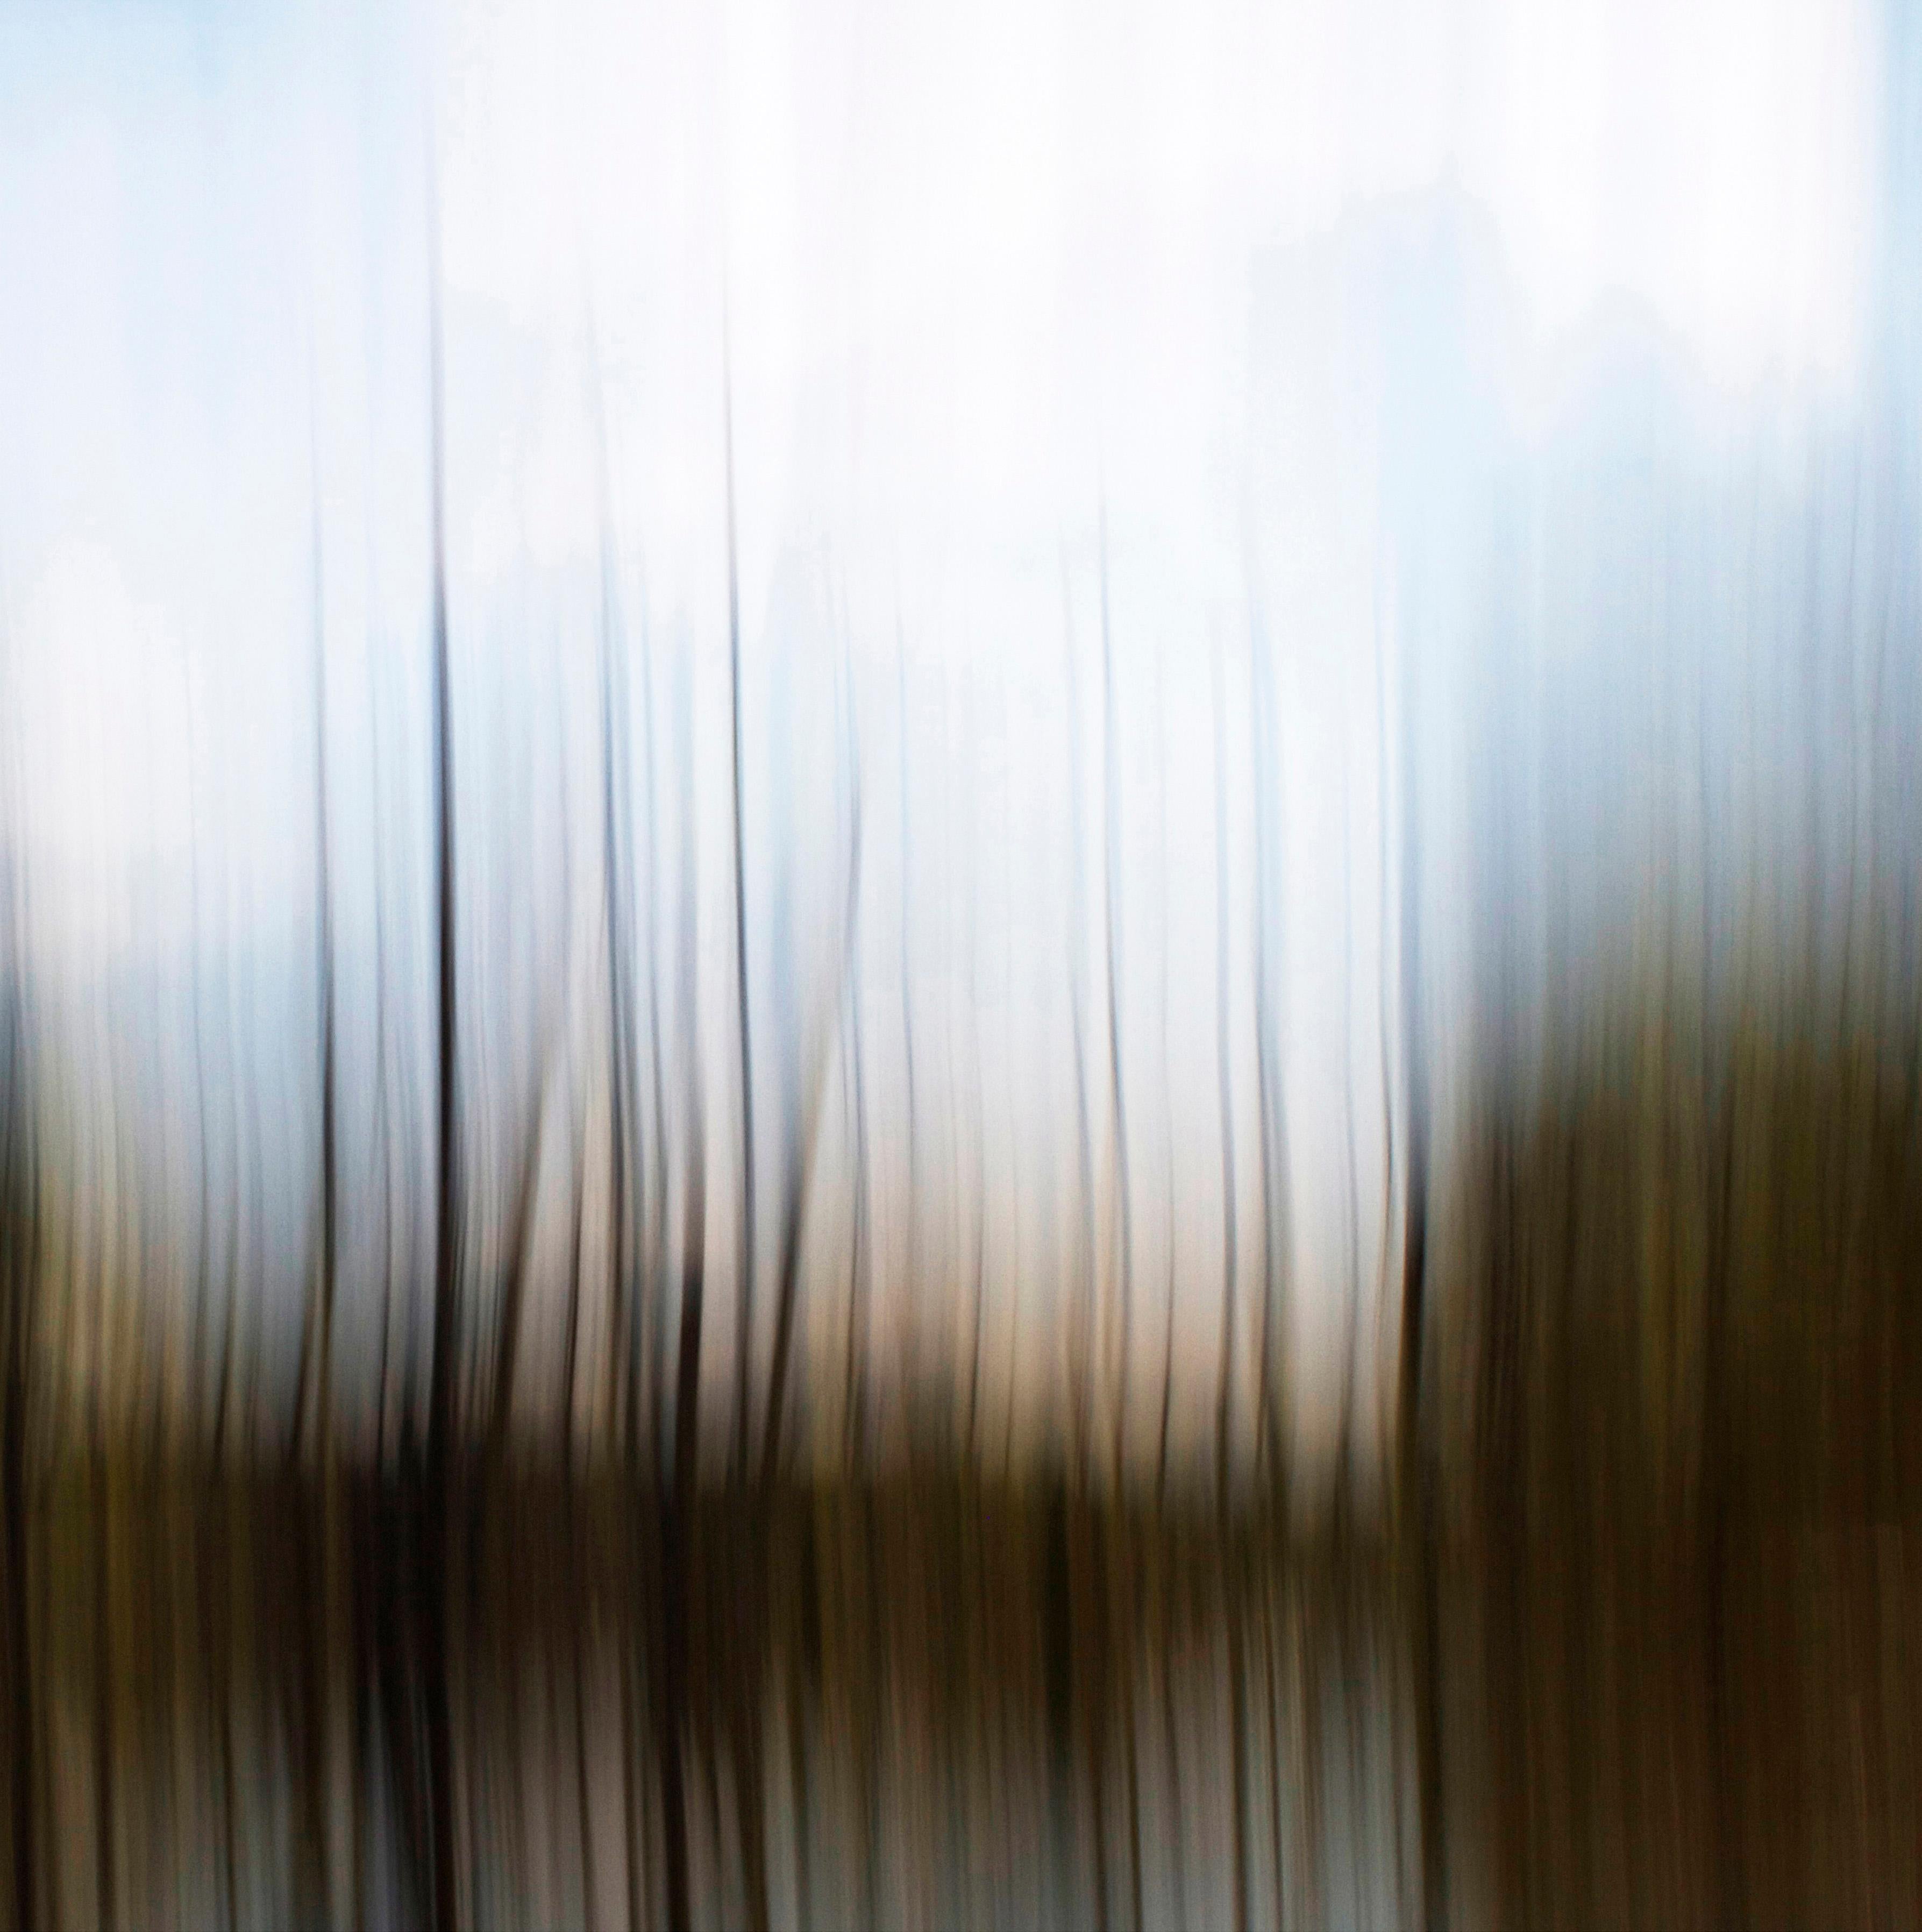 Through The Wetlands - contemporary, abstracted landscape, photography on dibond - Photograph by Etienne Labbe